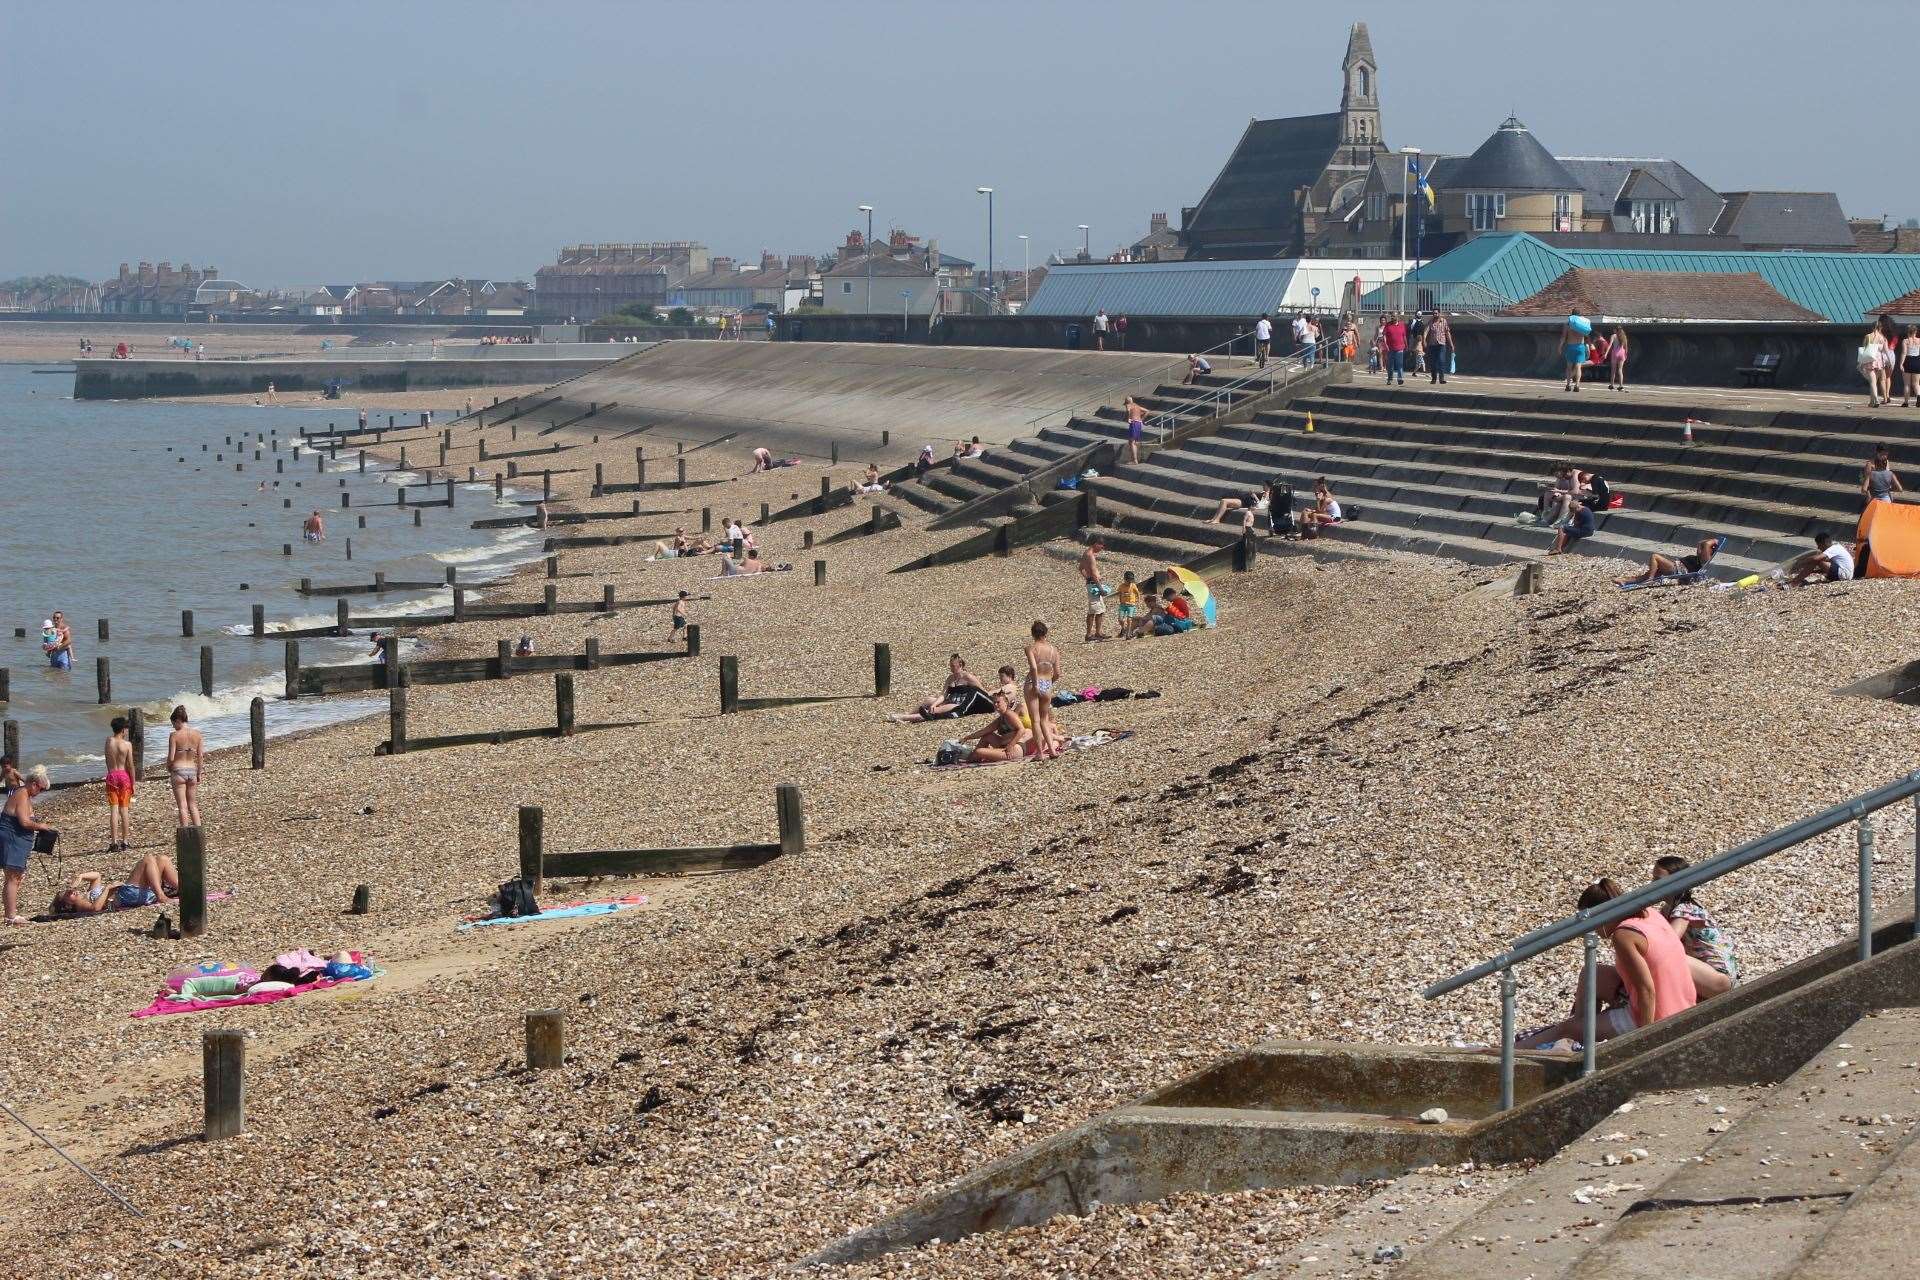 Sheerness beach is one of those affected by pollution warnings